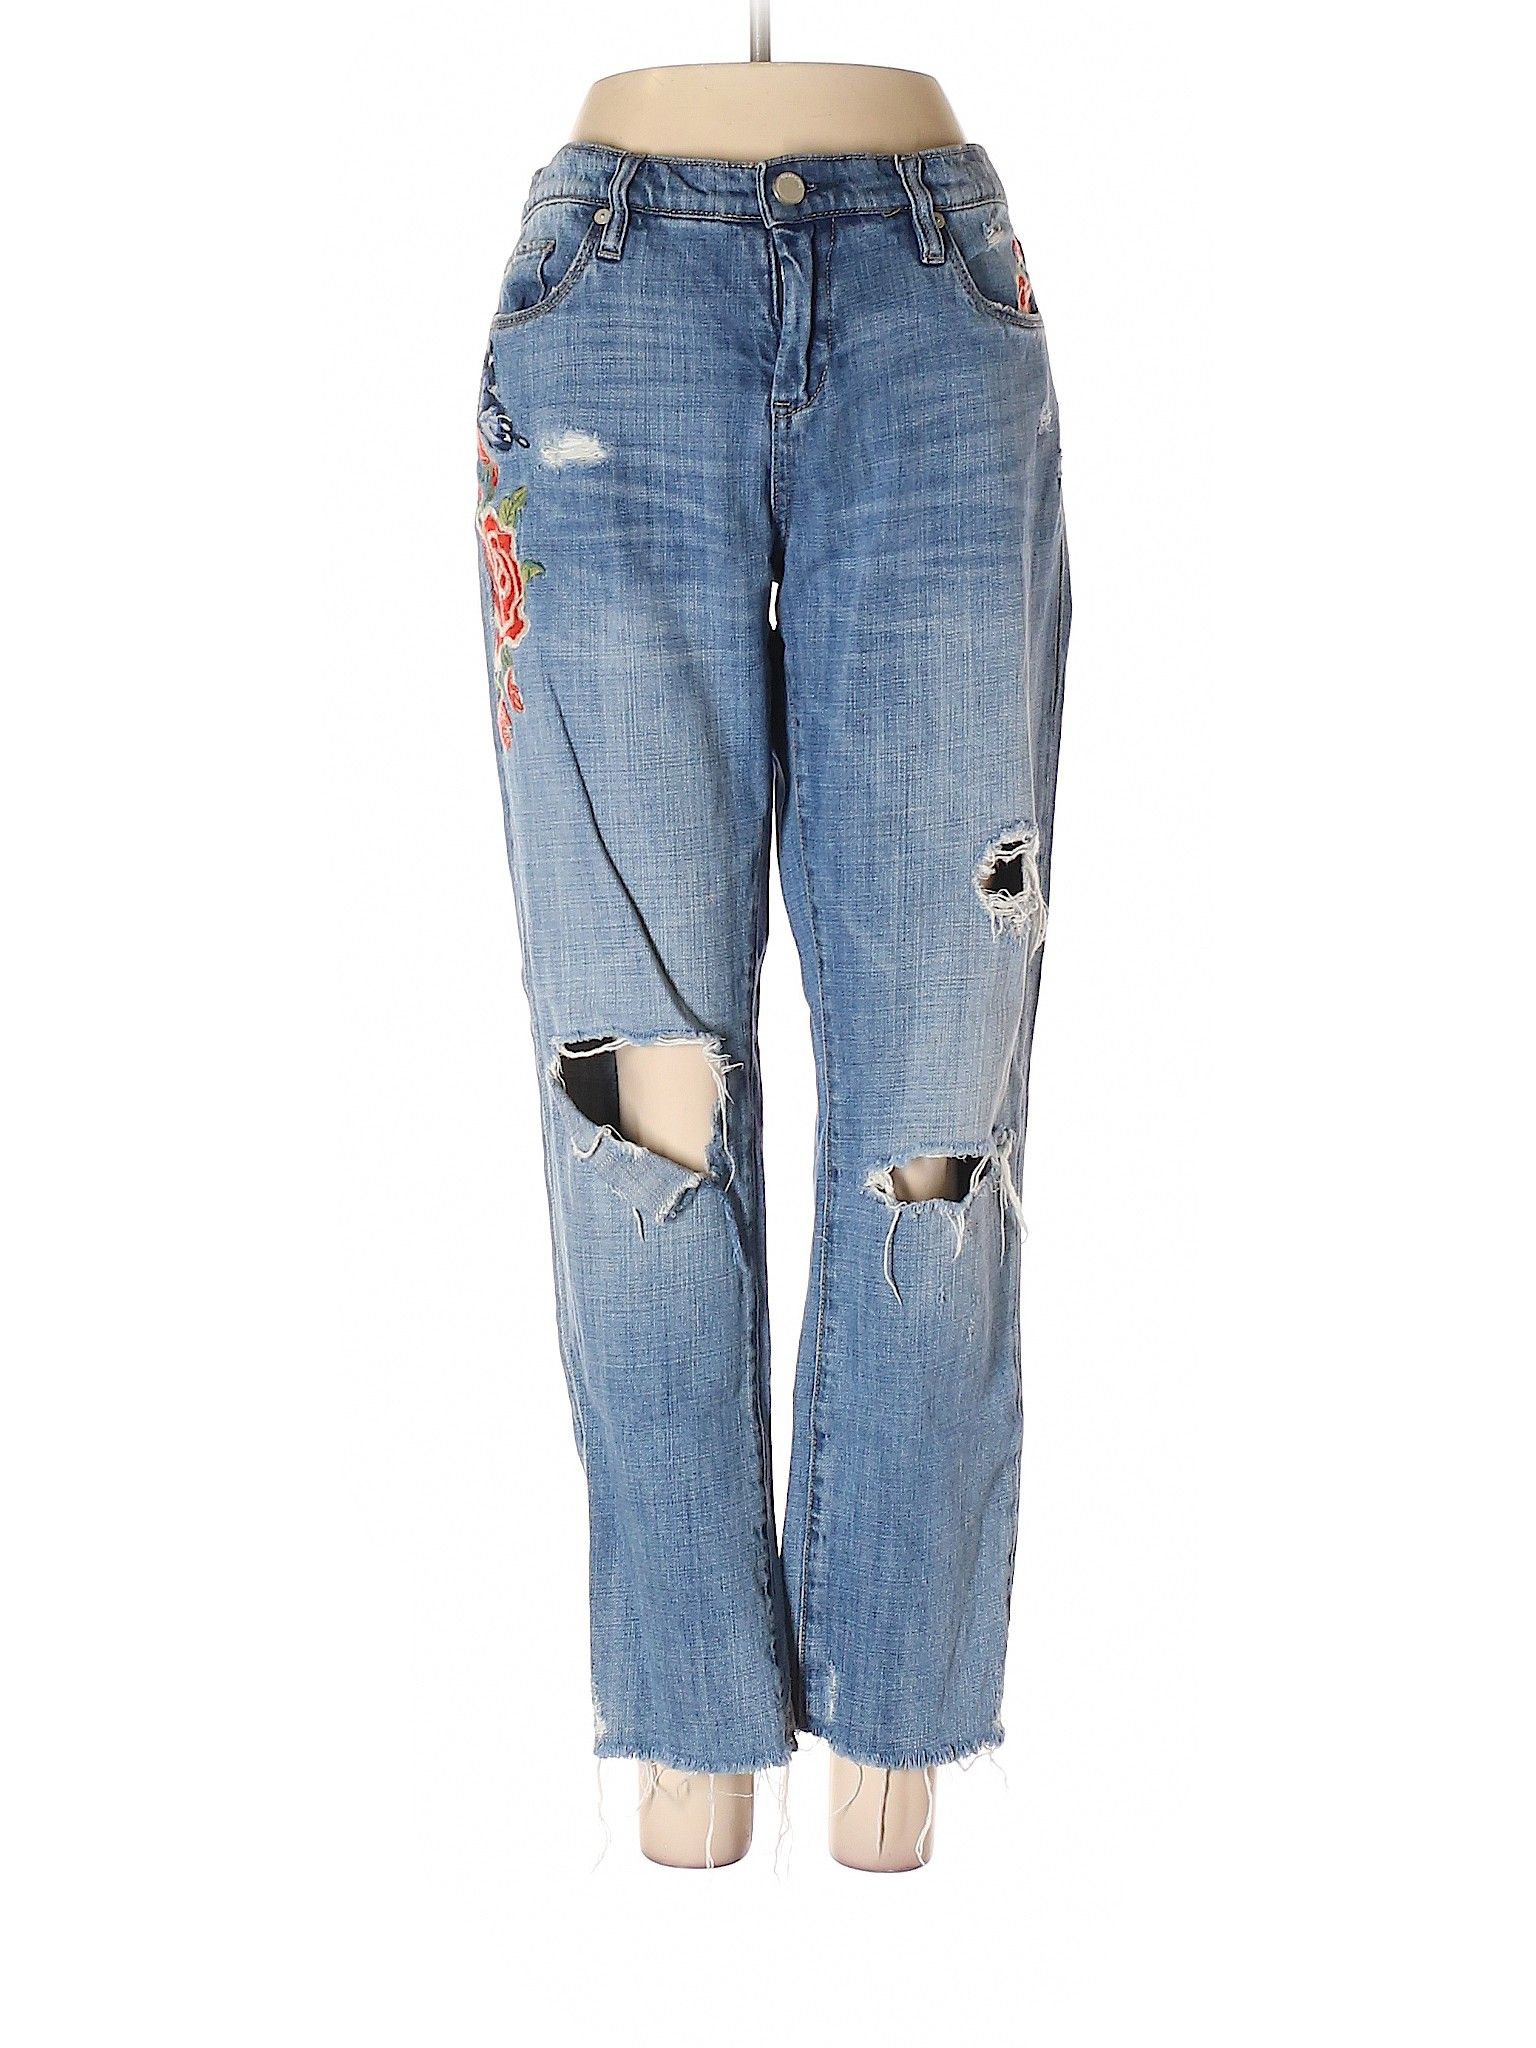 Blank NYC Jeans Size 4: Blue Women's Bottoms - 41606038 | thredUP